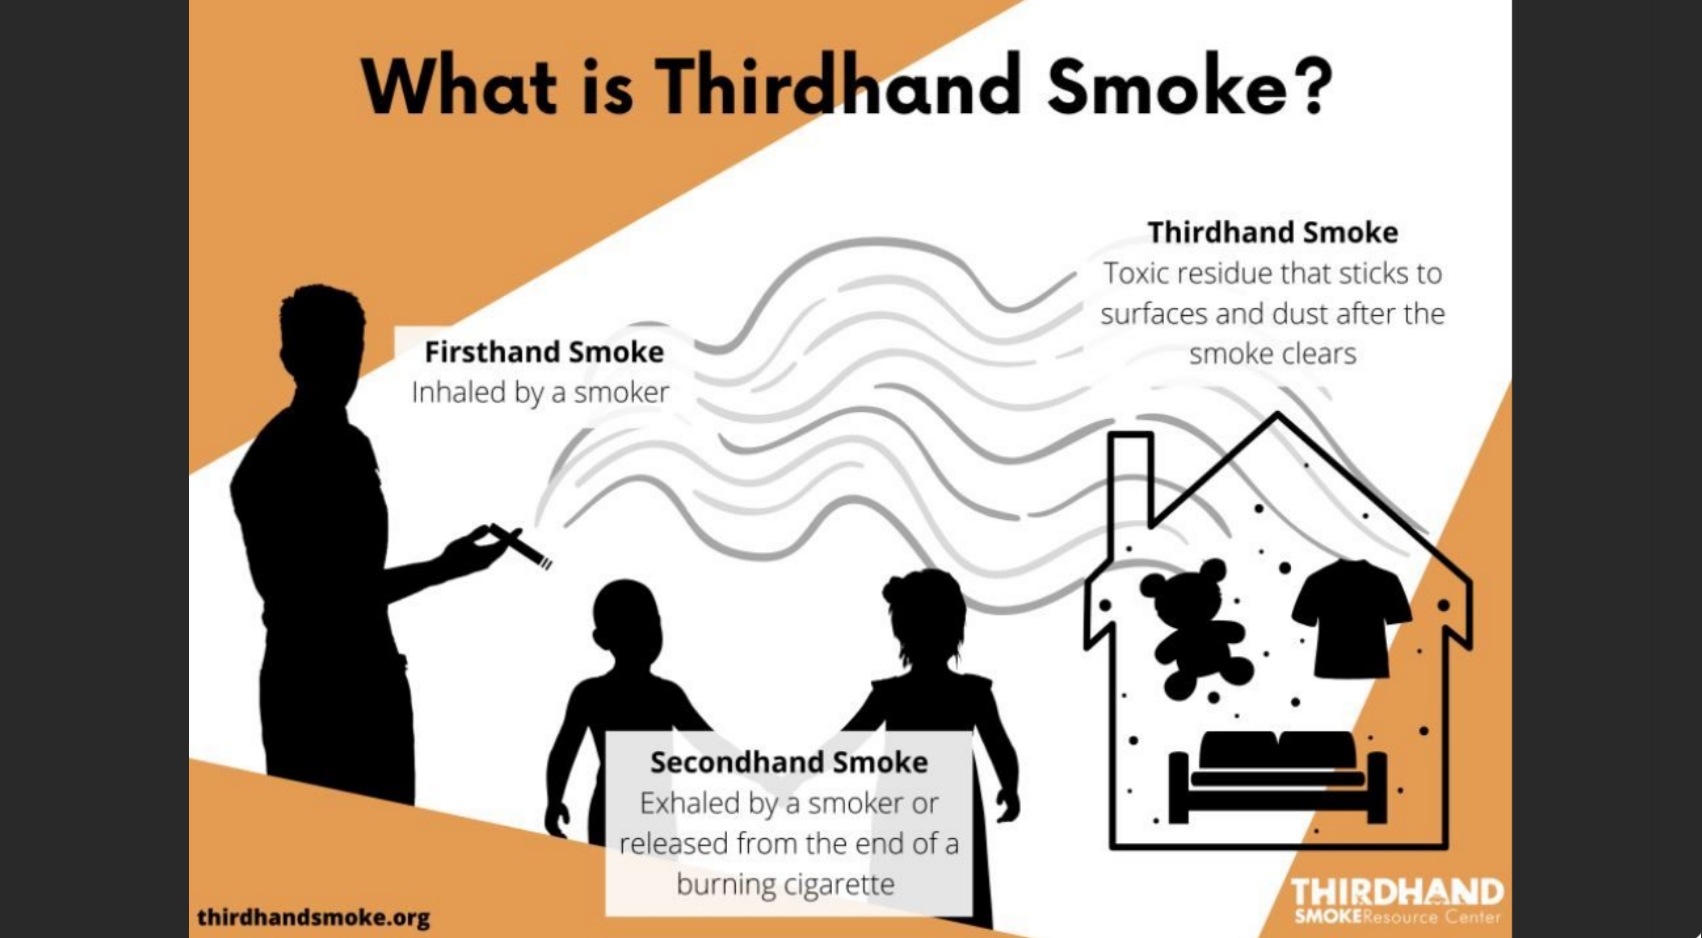 An explanatory visual describing first-, second-, and thirdhand smoke.